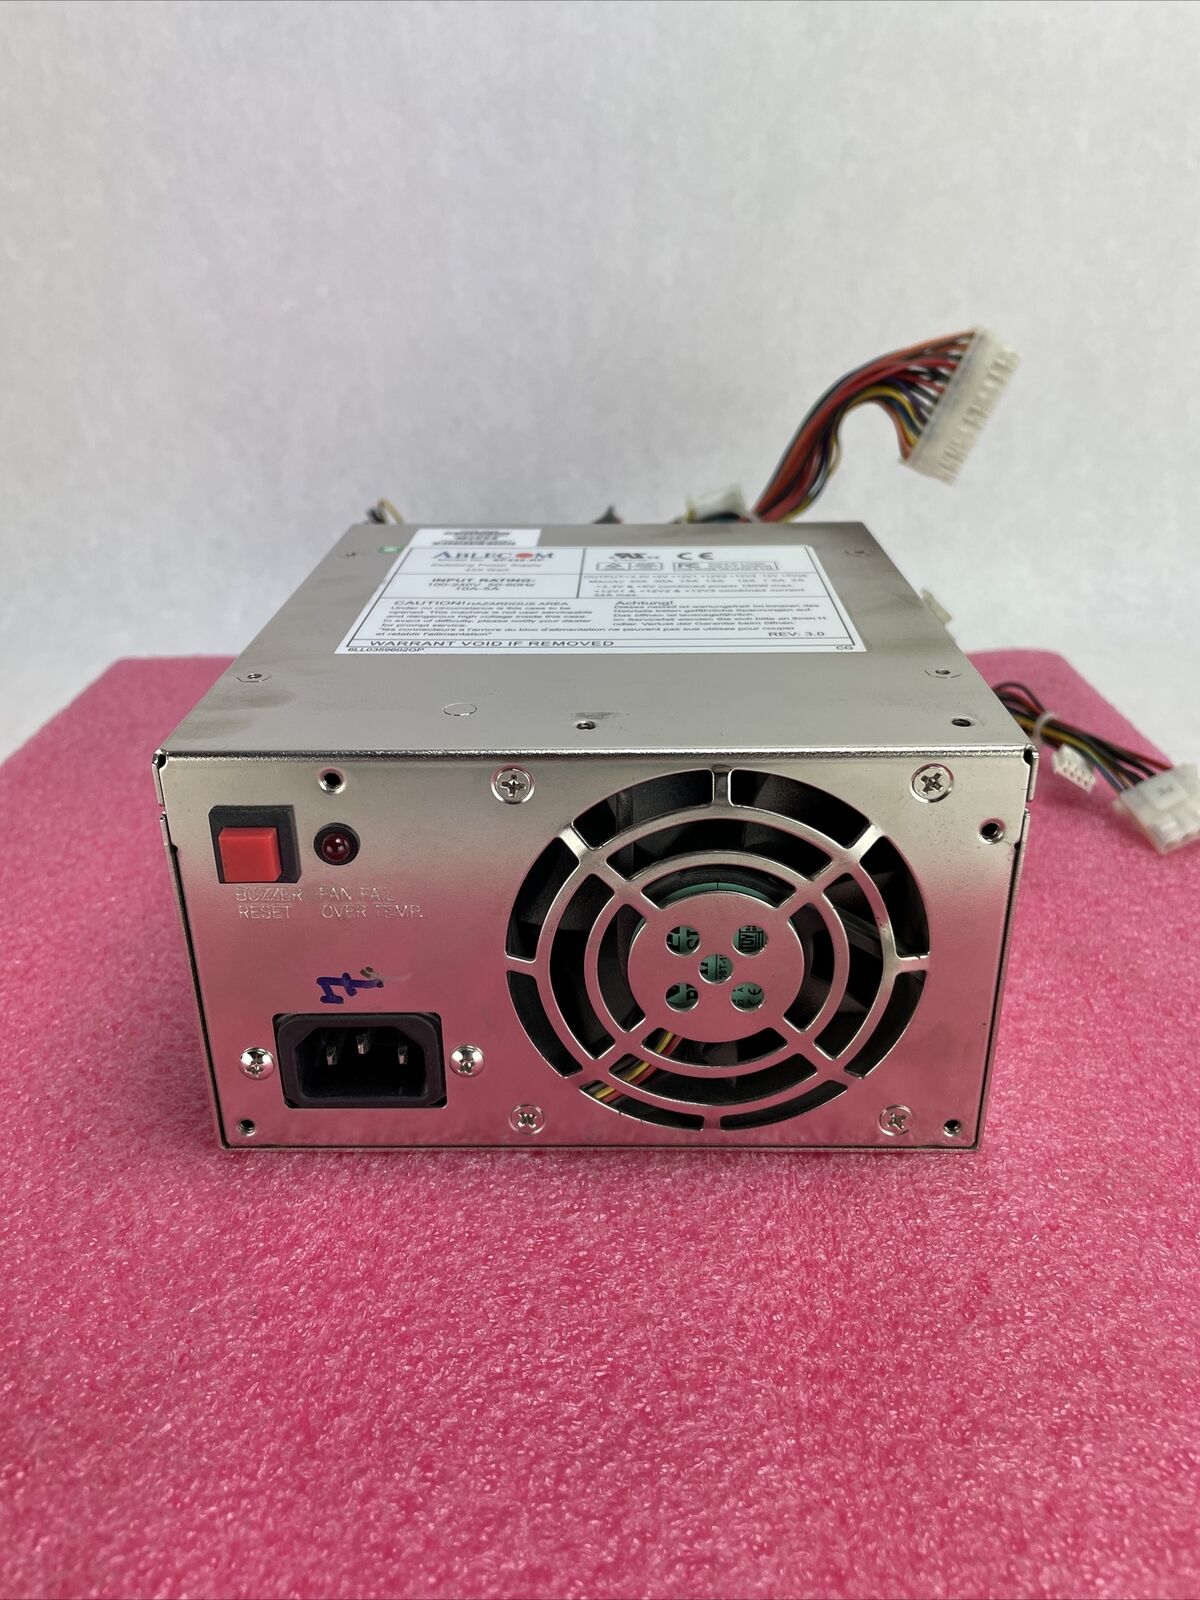 Ablecom SP450-RP 450W Switching Power Supply